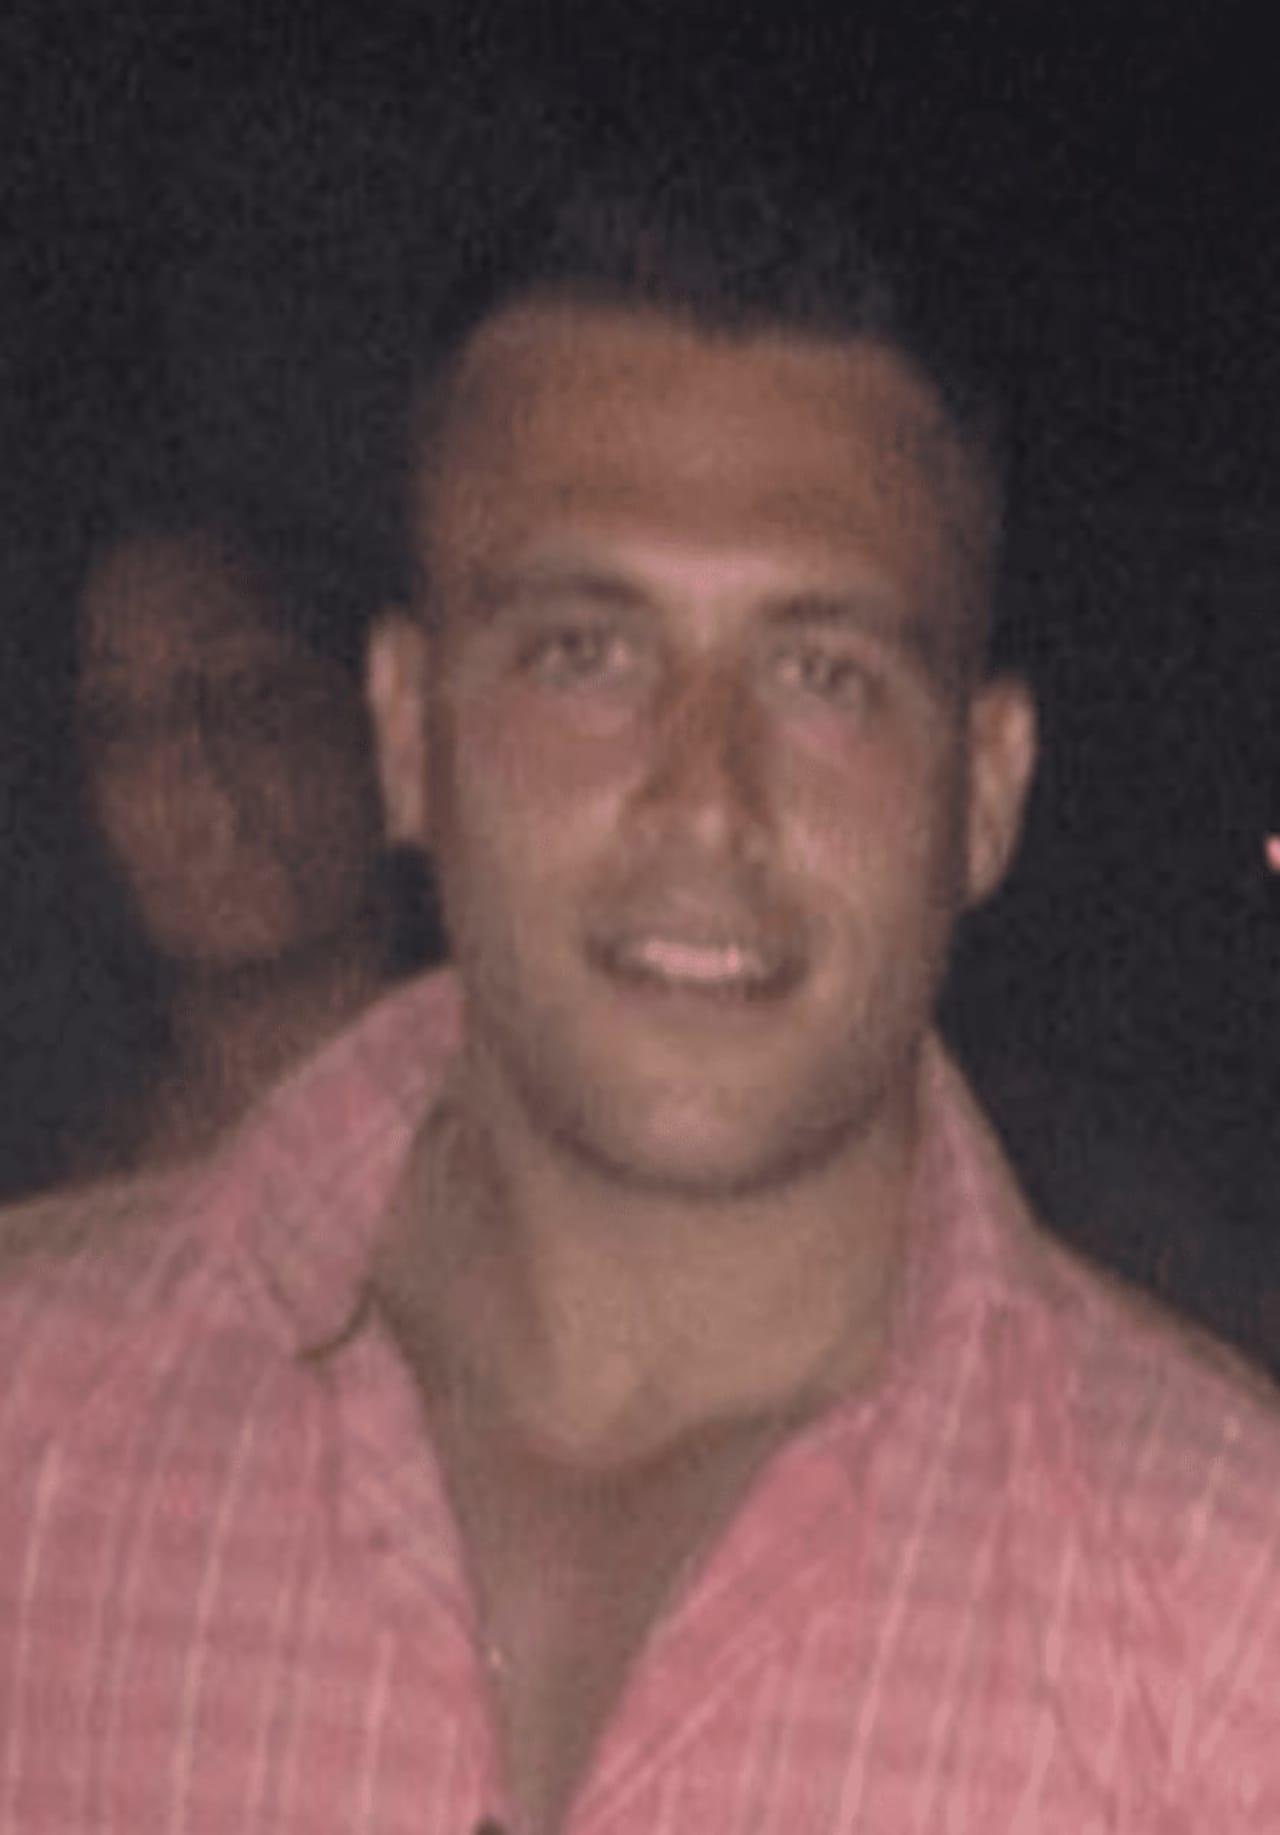 The body of Joey Comunale, who was reported missing Sunday, was found Wednesday in New Jersey.